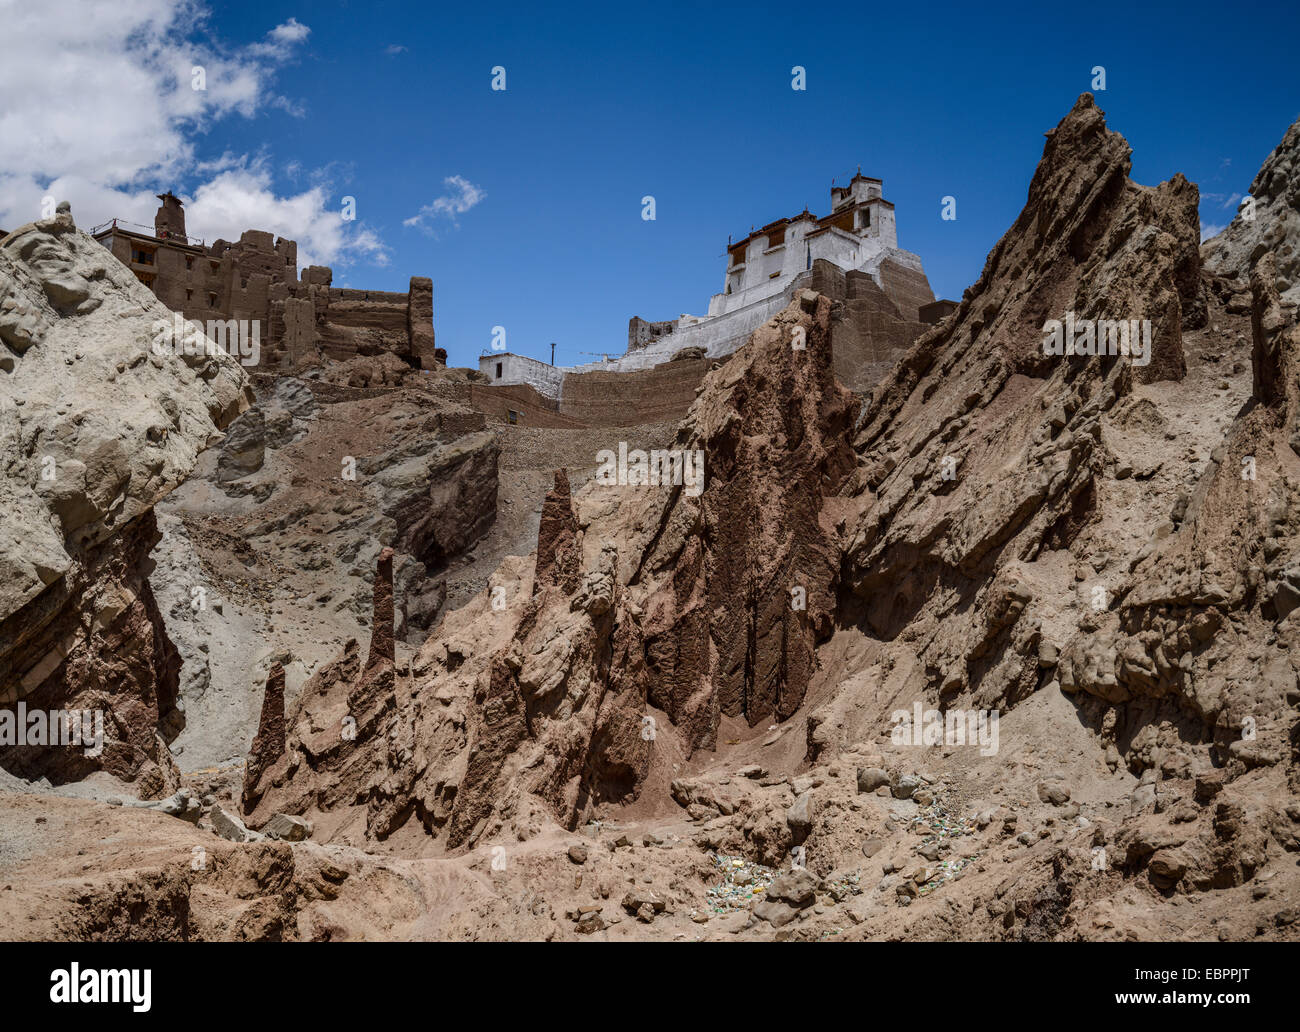 The 16th and 17th century fort and monastery at Basgo, Ladakh, Himalayas, India, Asia Stock Photo